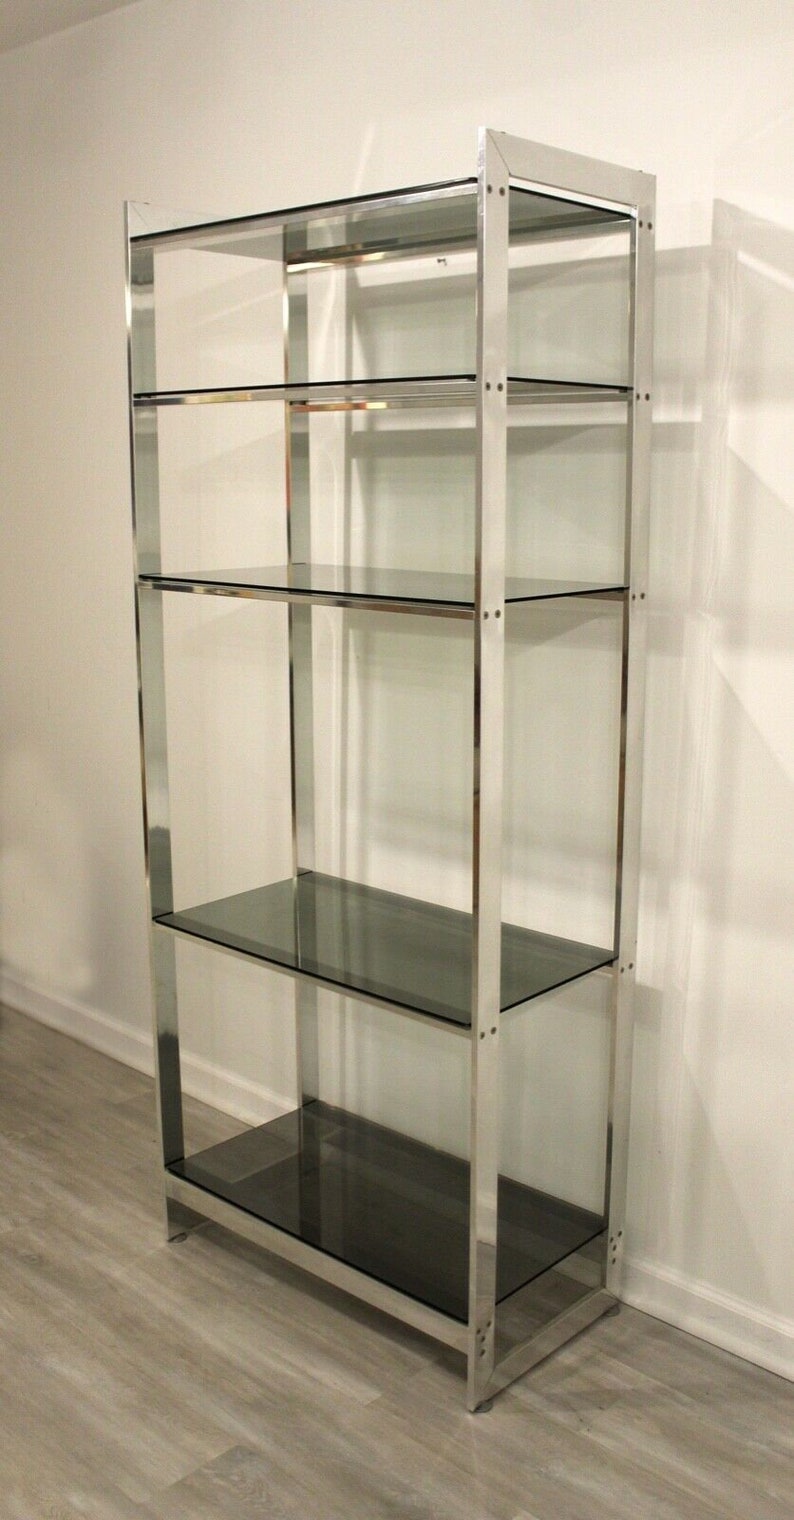 Baughman Style Brushed Steel & Smoked Glass Etagere Shelving Unitetagere imagen 7